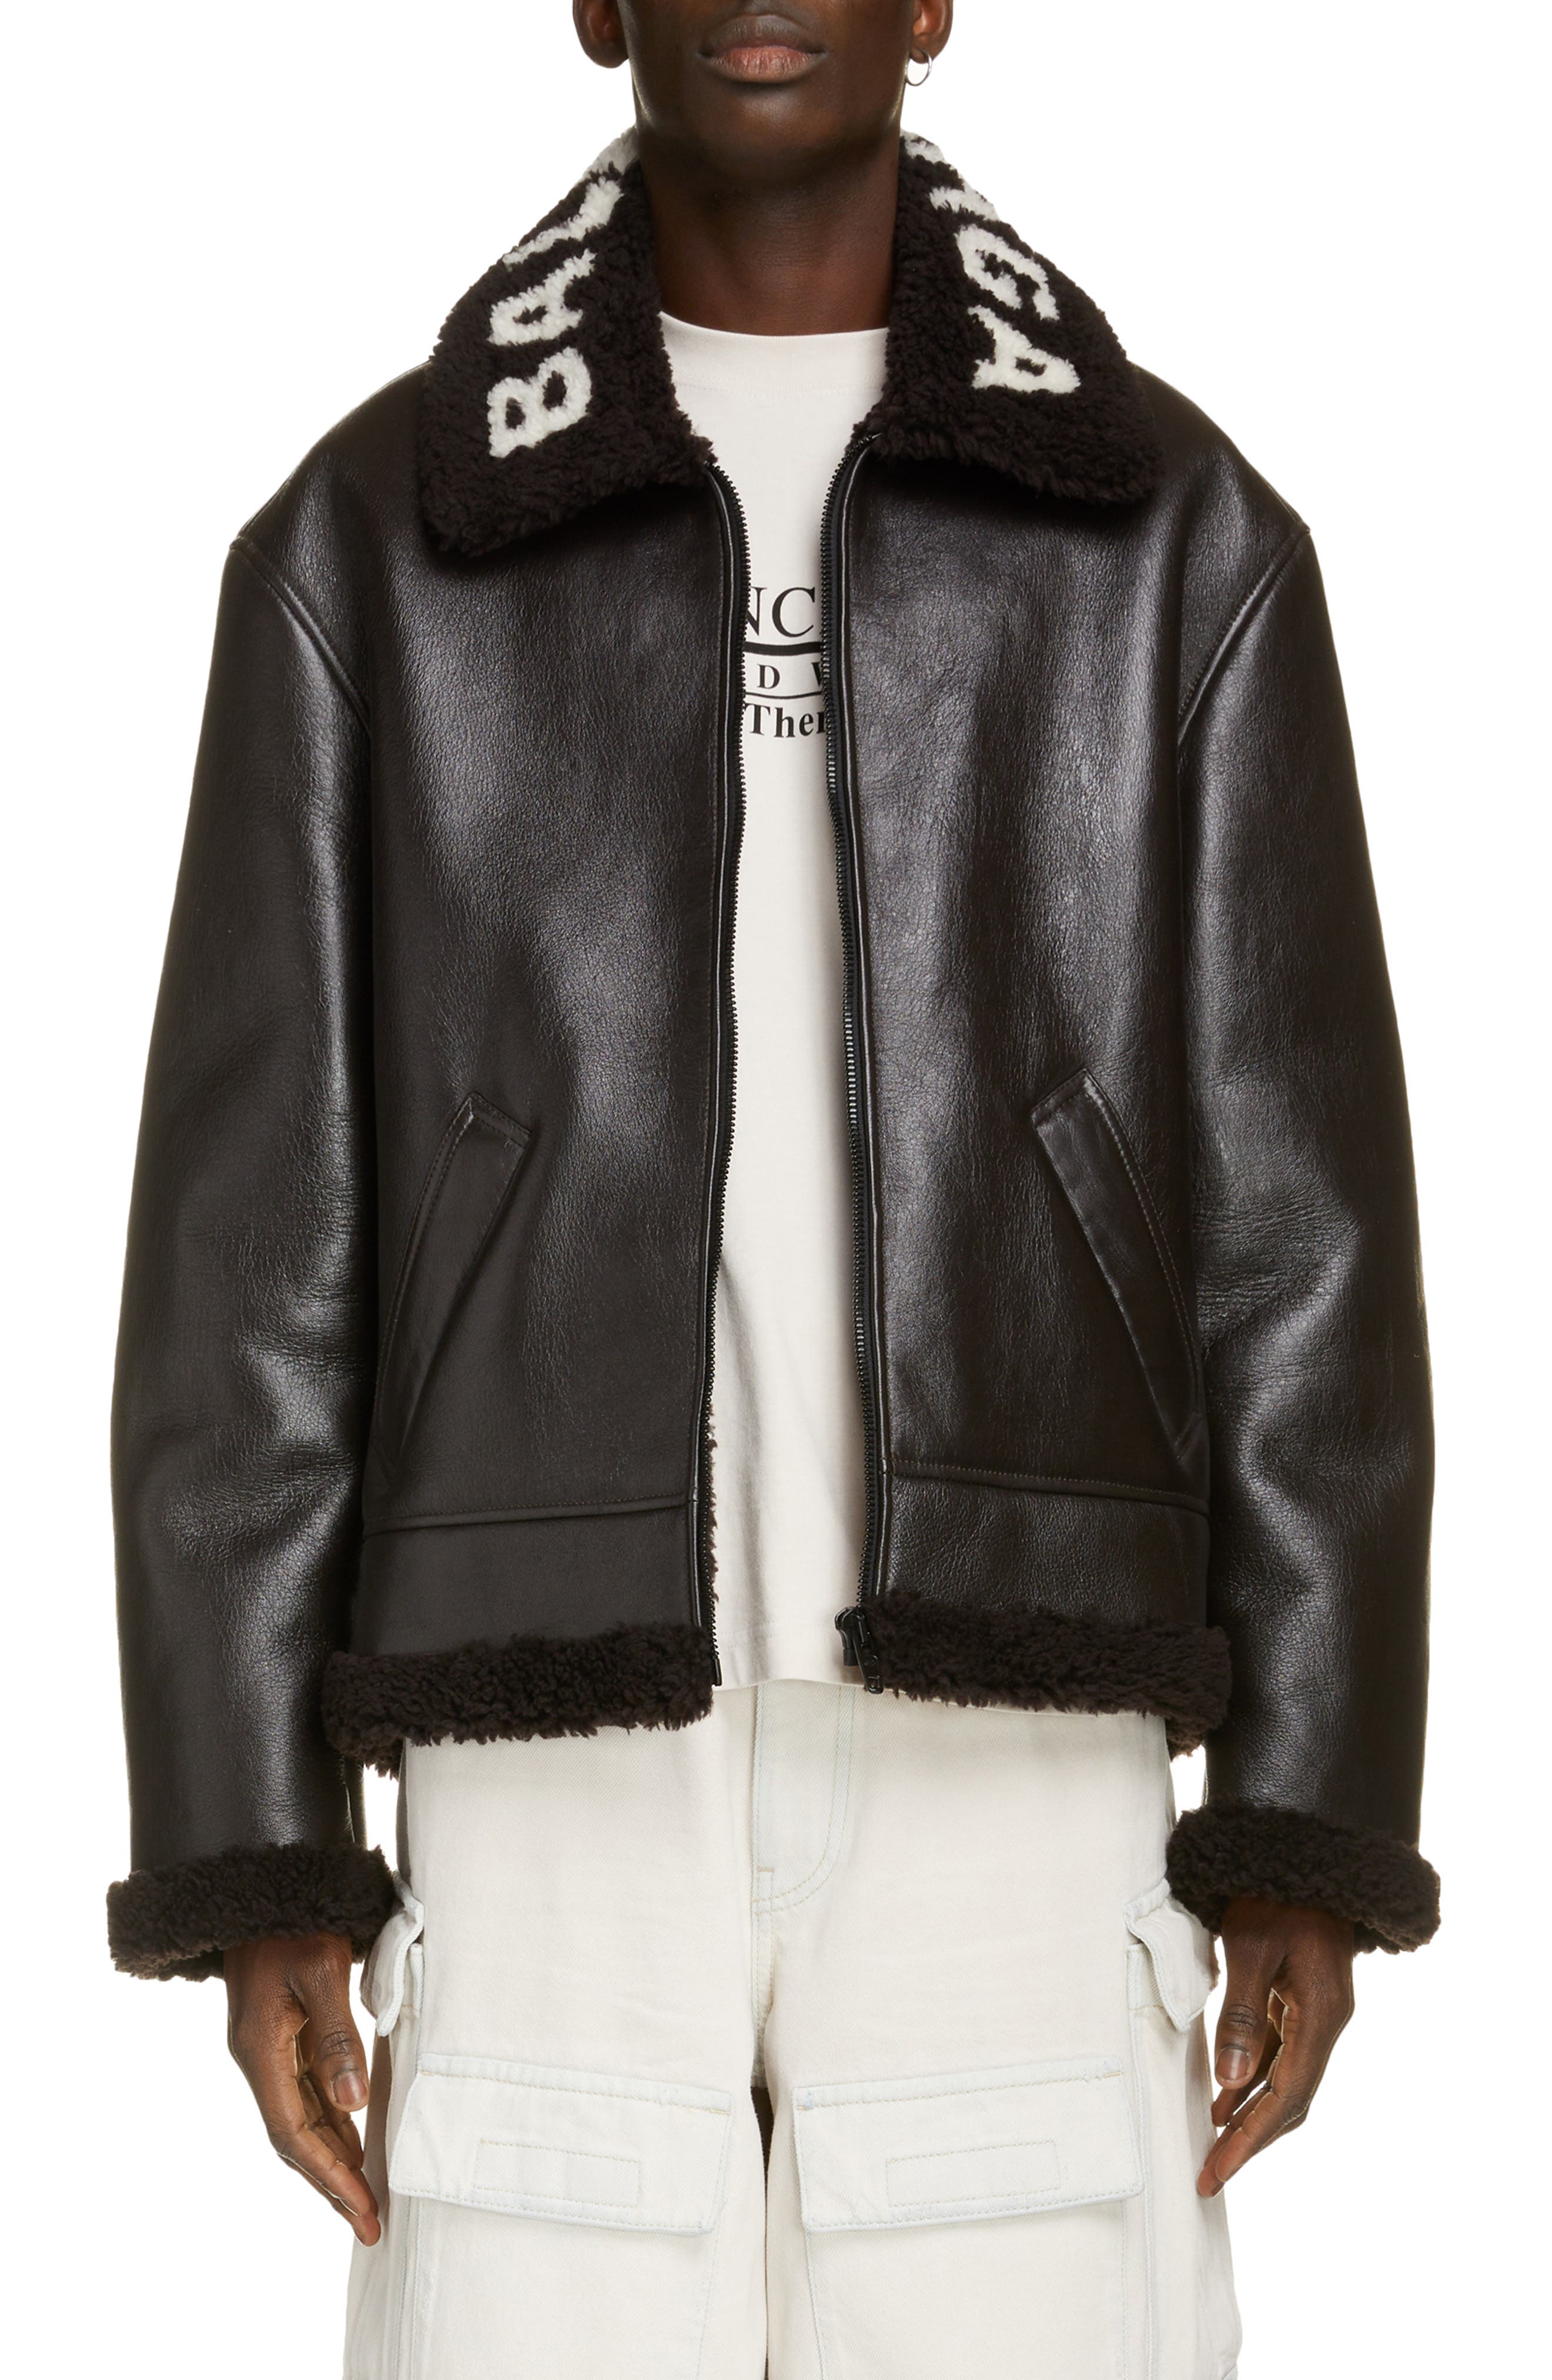 Balenciaga Logo Collar Leather Jacket with Genuine Shearling Lining in Black/Black at Nordstrom, Size 36 Us